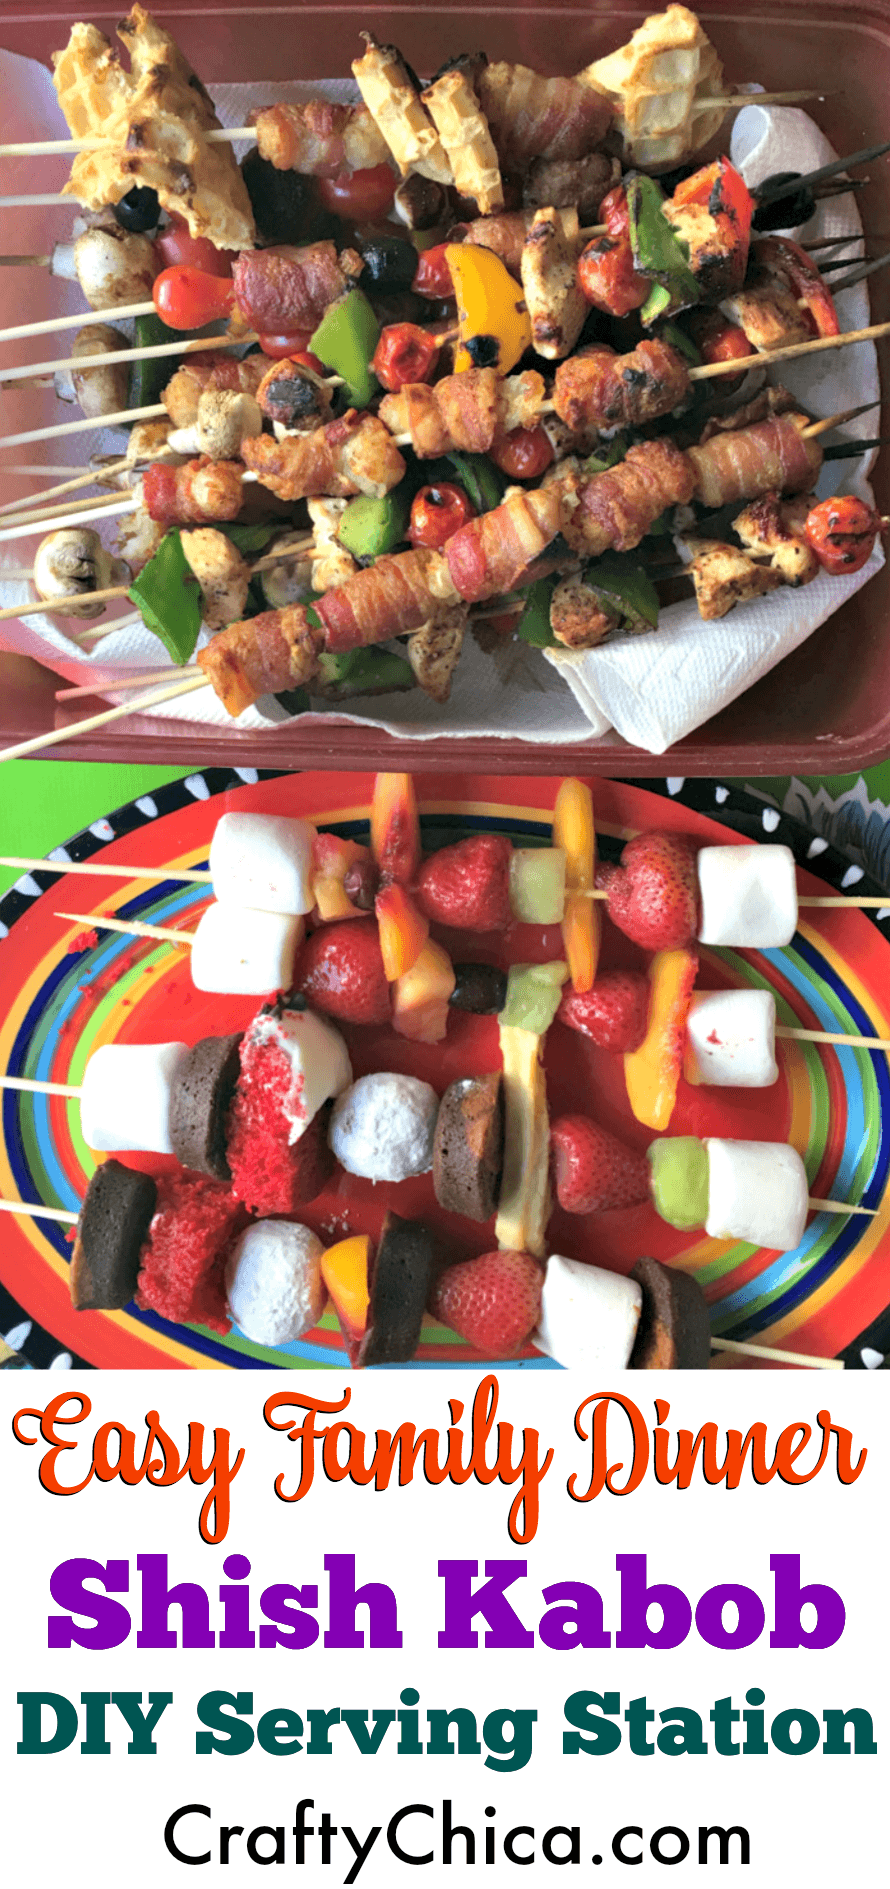 How to have a fun shish kabob night for dinner, by CraftyChica.com